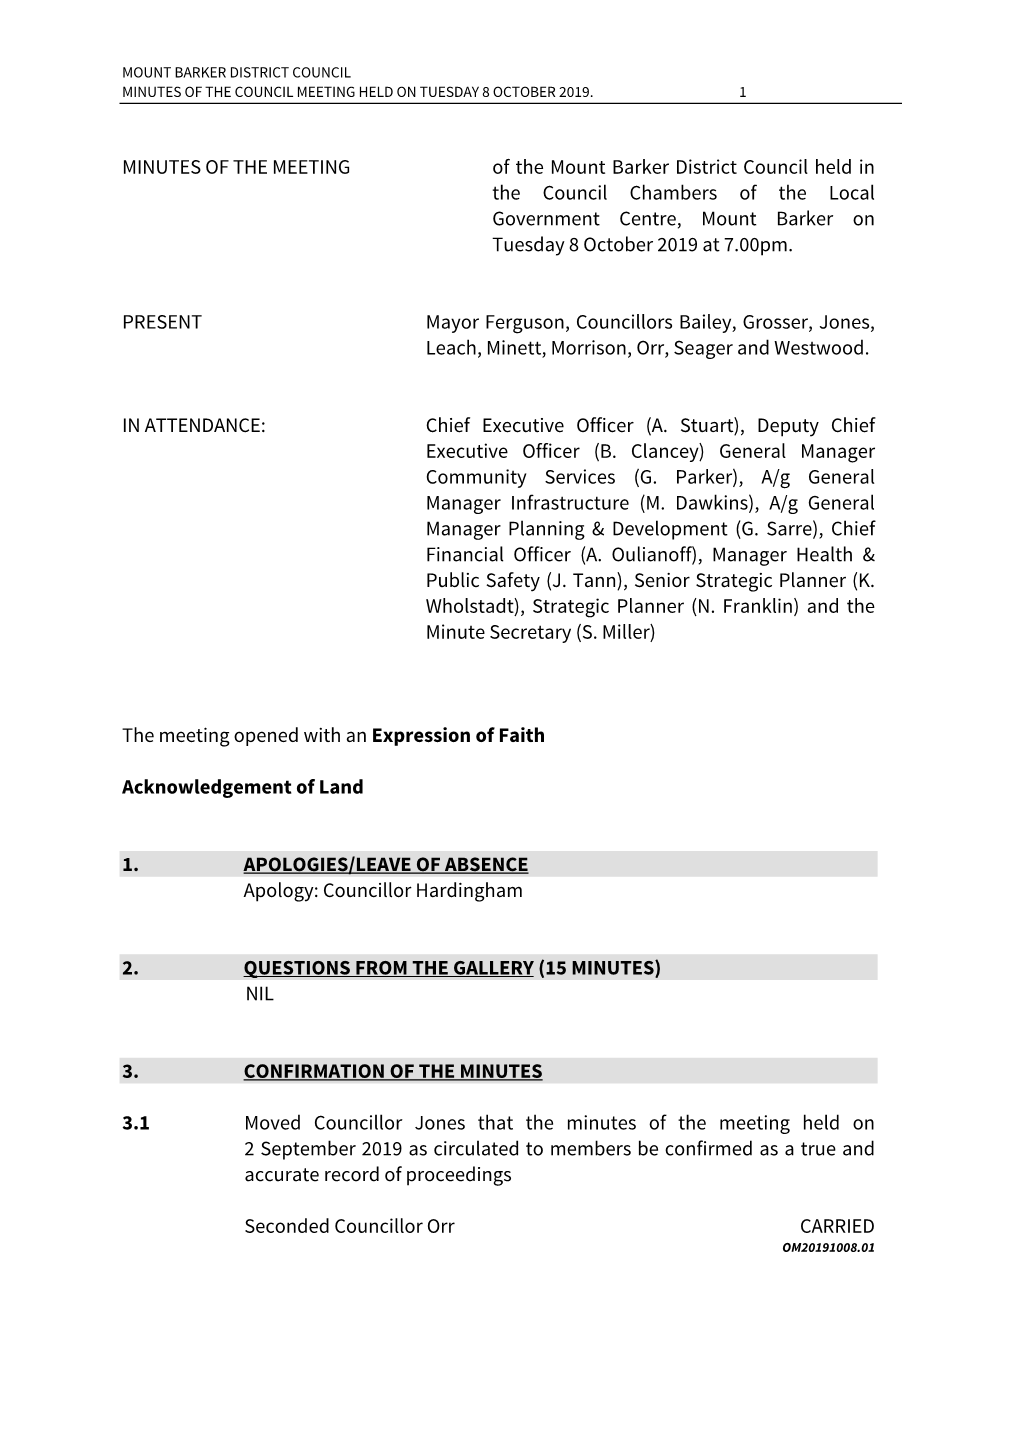 MINUTES of the MEETING of the Mount Barker District Council Held